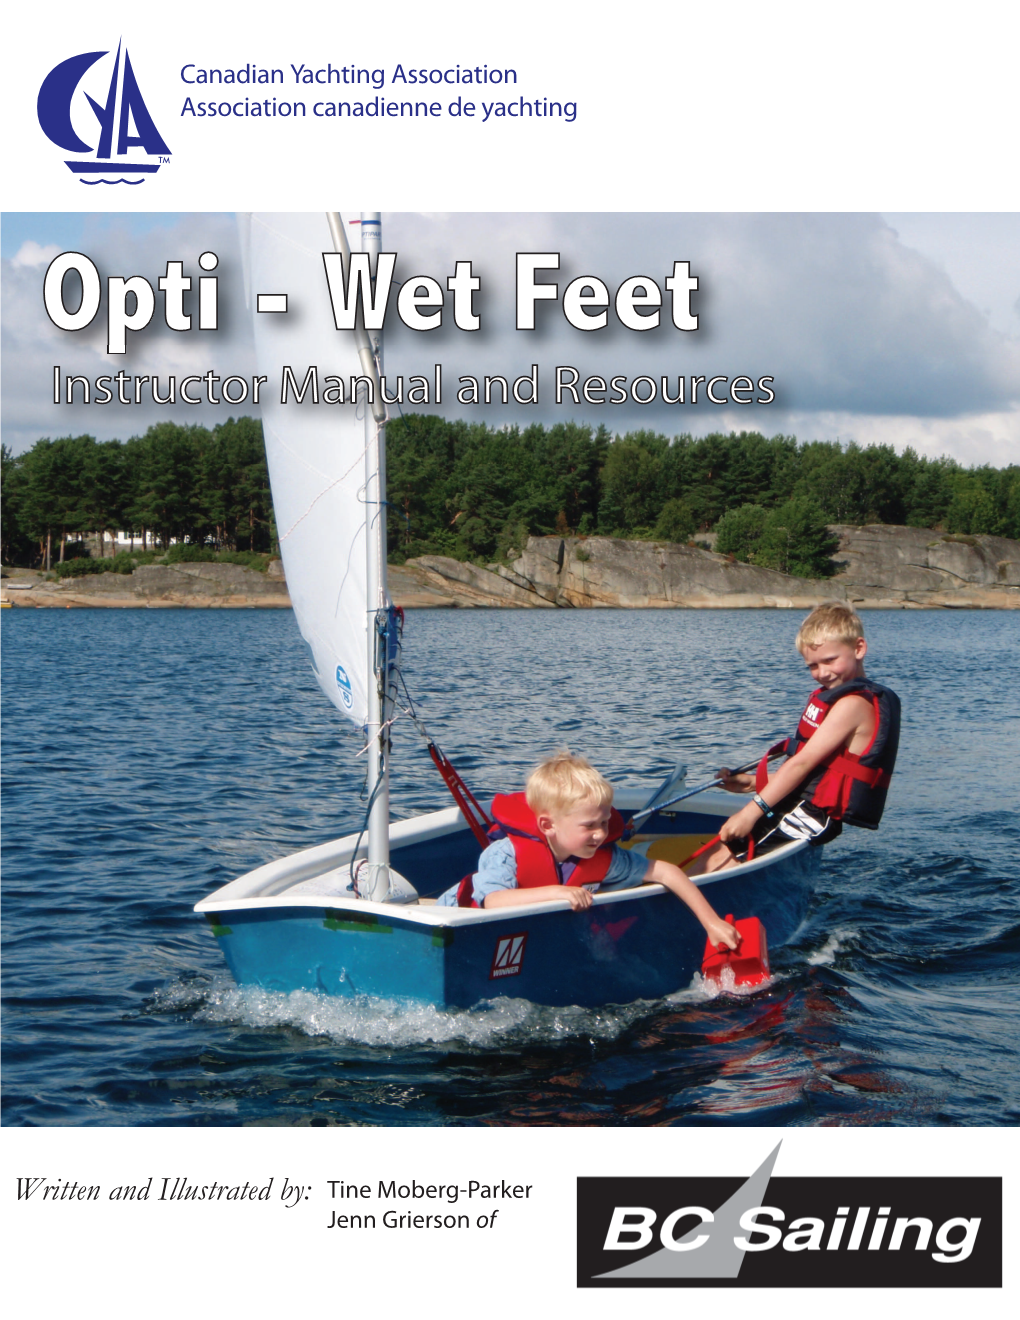 Opti - Wet Feet Instructor Manual and Resources